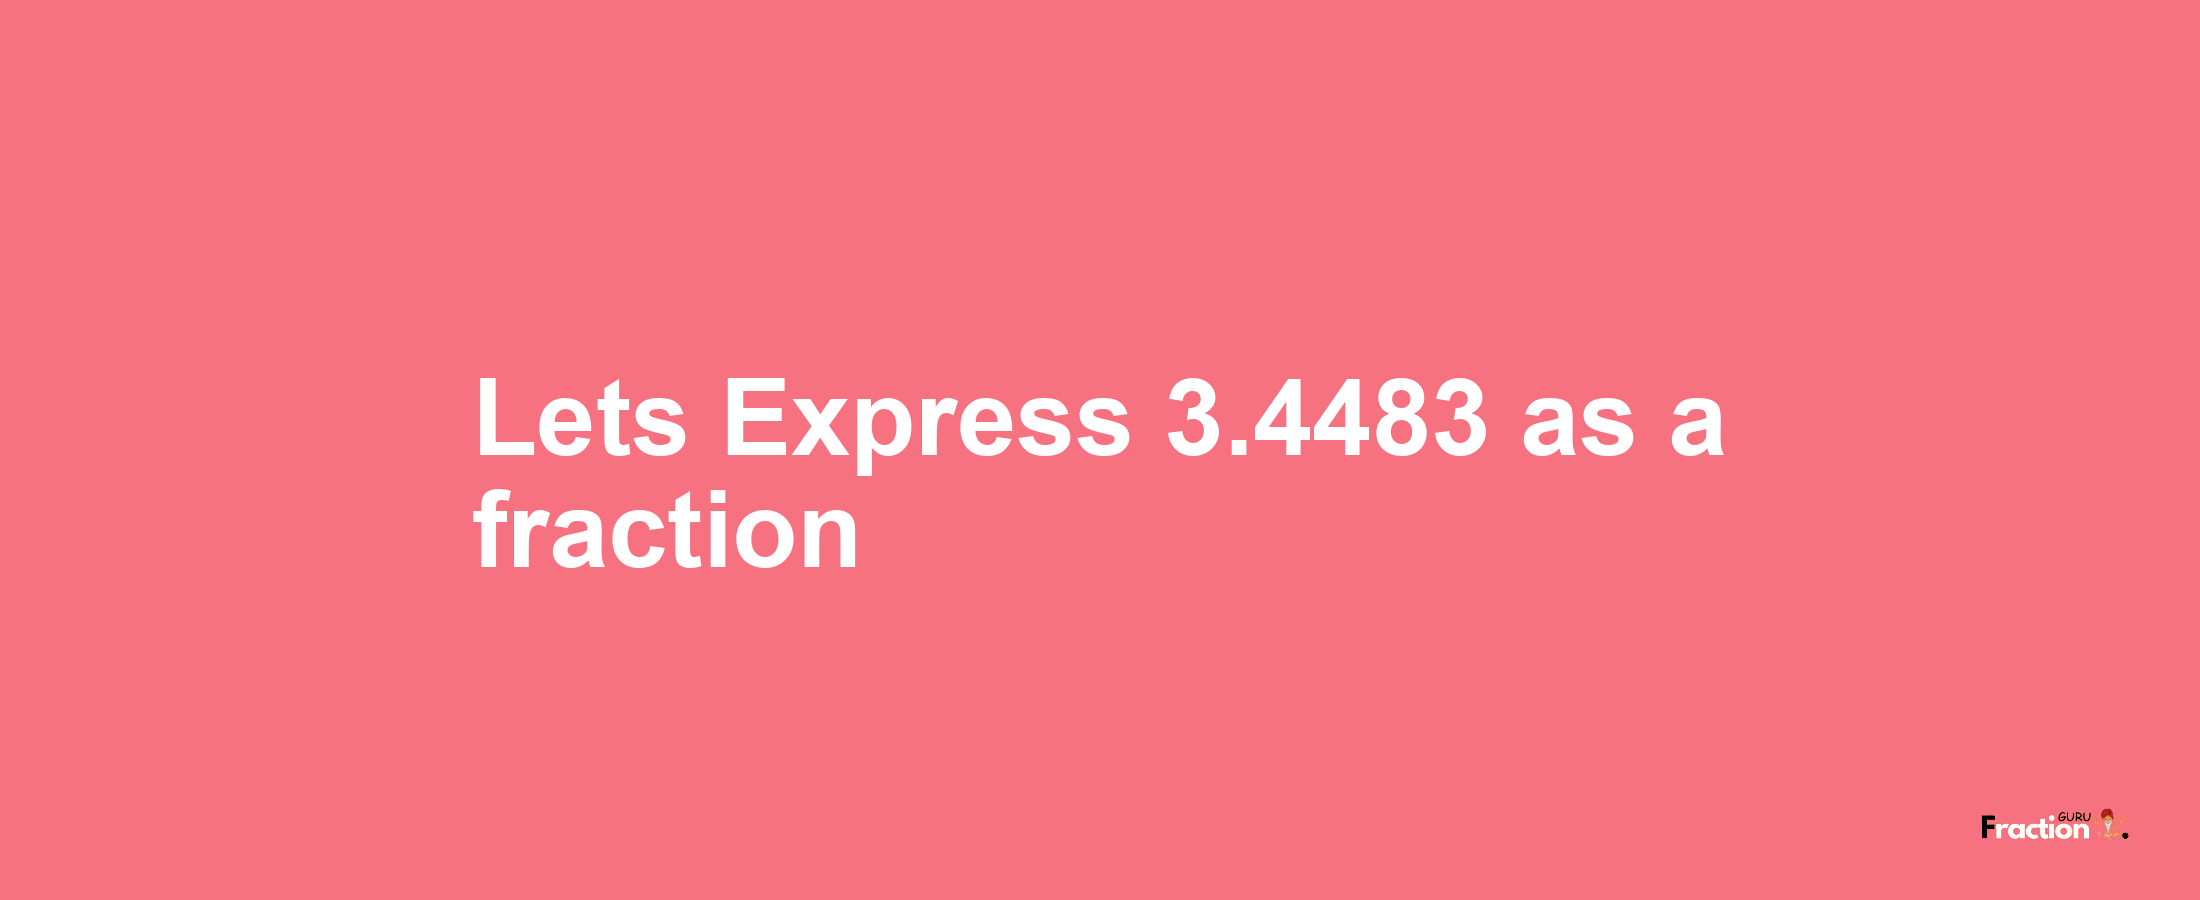 Lets Express 3.4483 as afraction